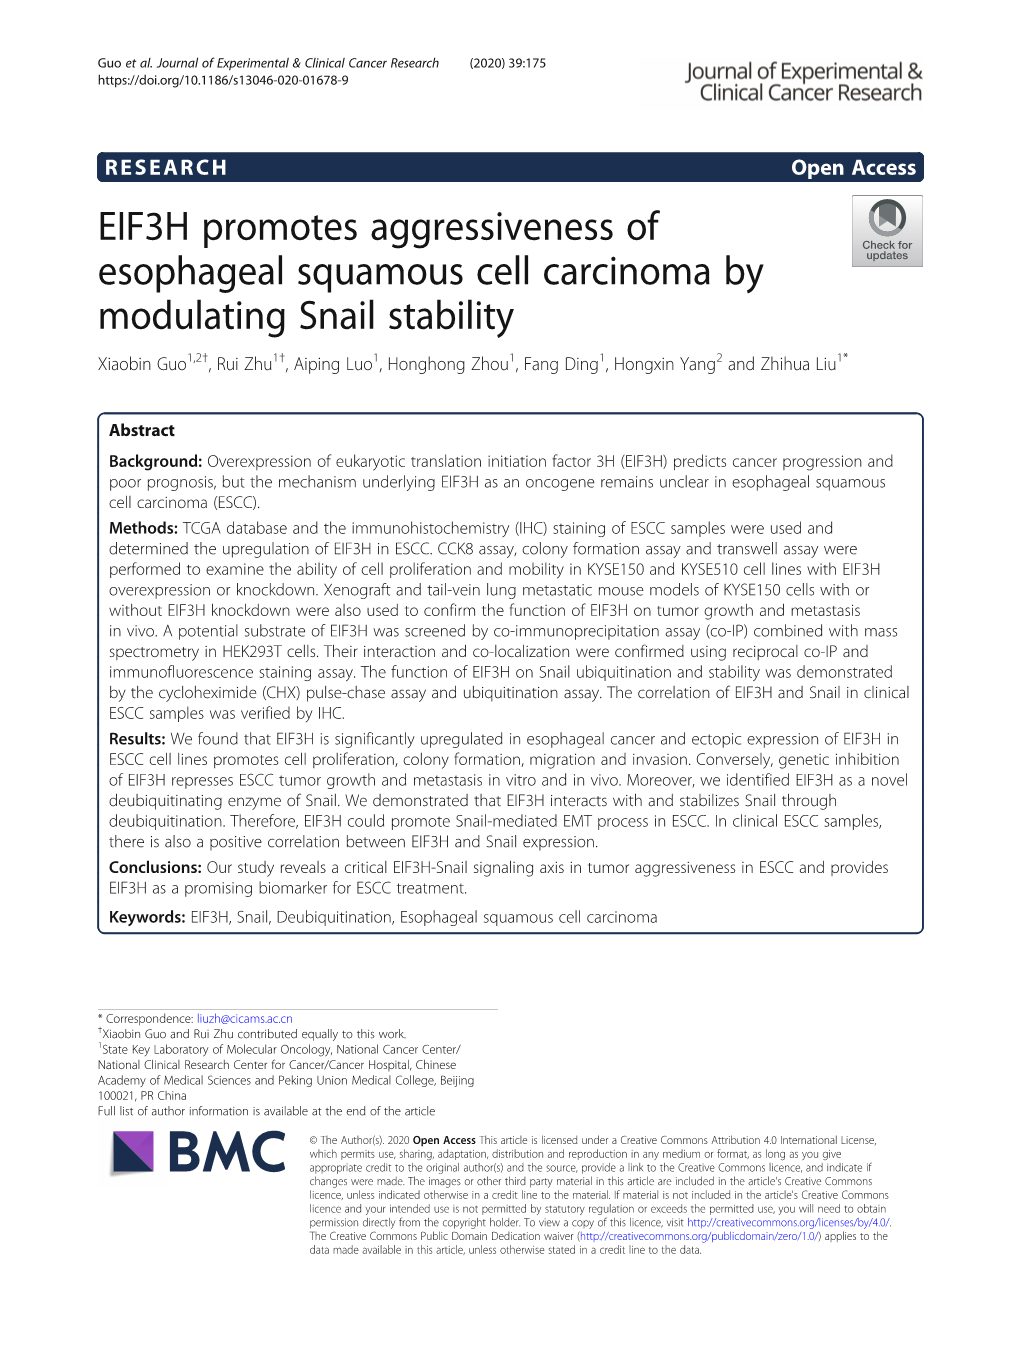 EIF3H Promotes Aggressiveness of Esophageal Squamous Cell